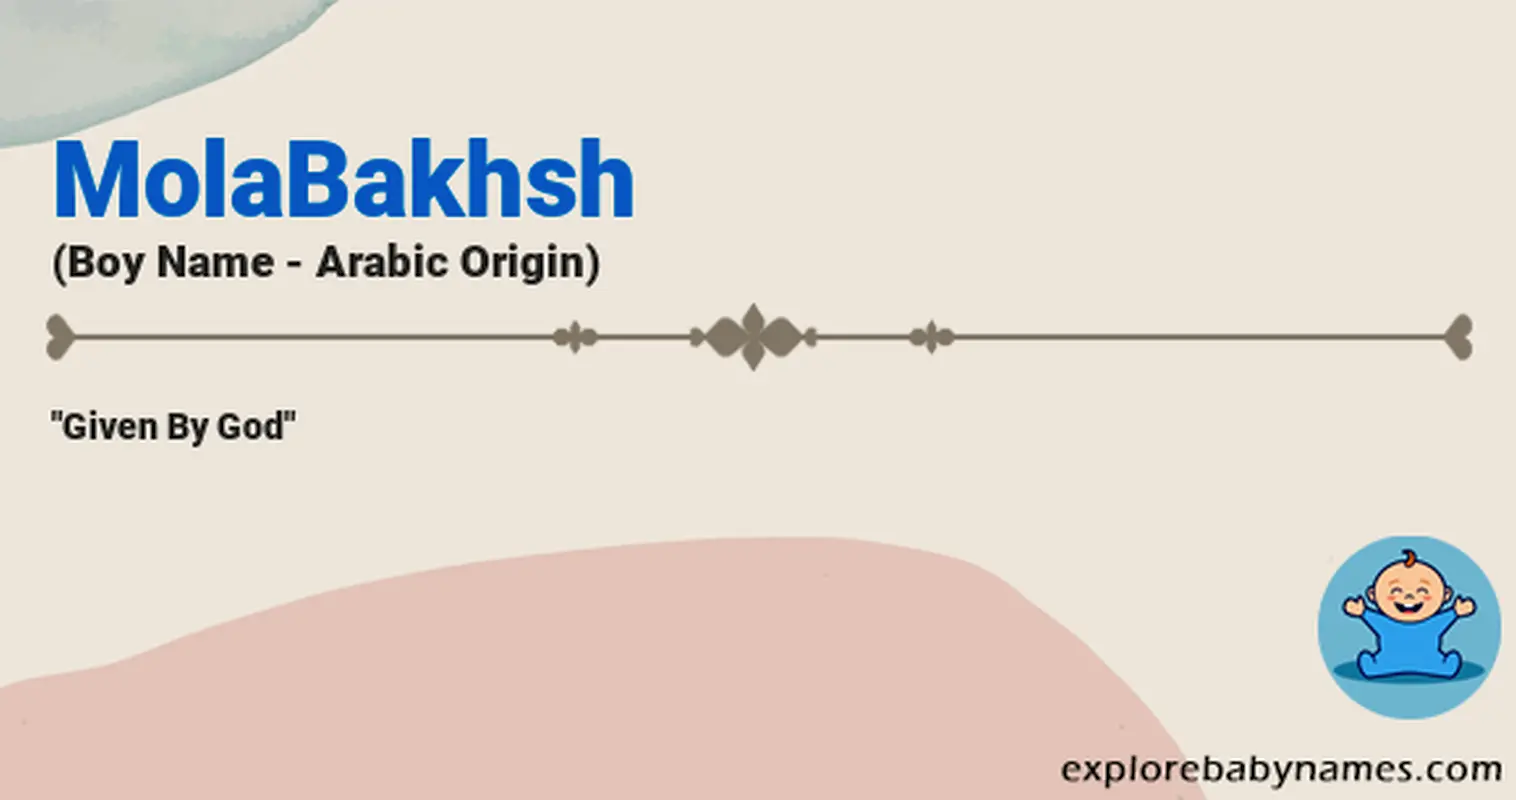 Meaning of MolaBakhsh